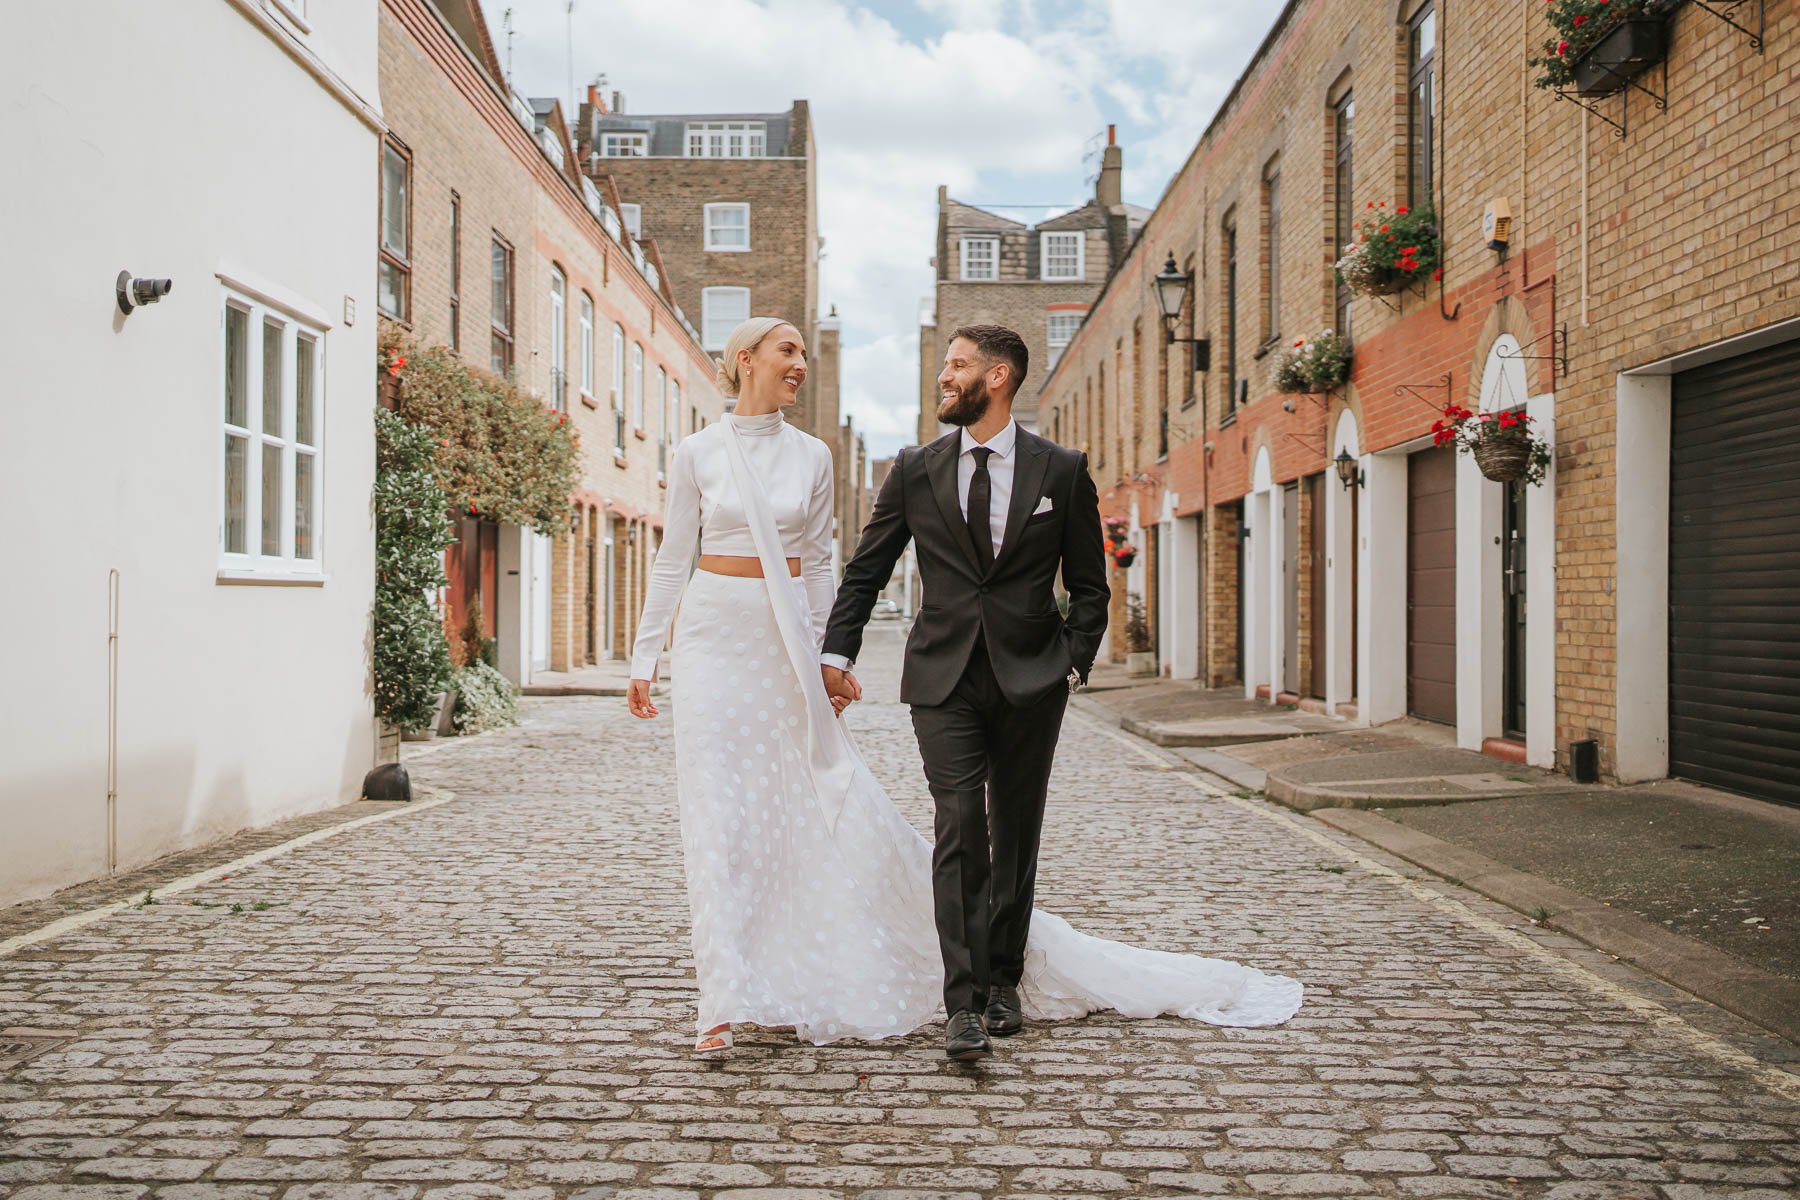  Bride and groom walk towards photographer hand in hand down cobbled street behind Marylebone Town Hall.  